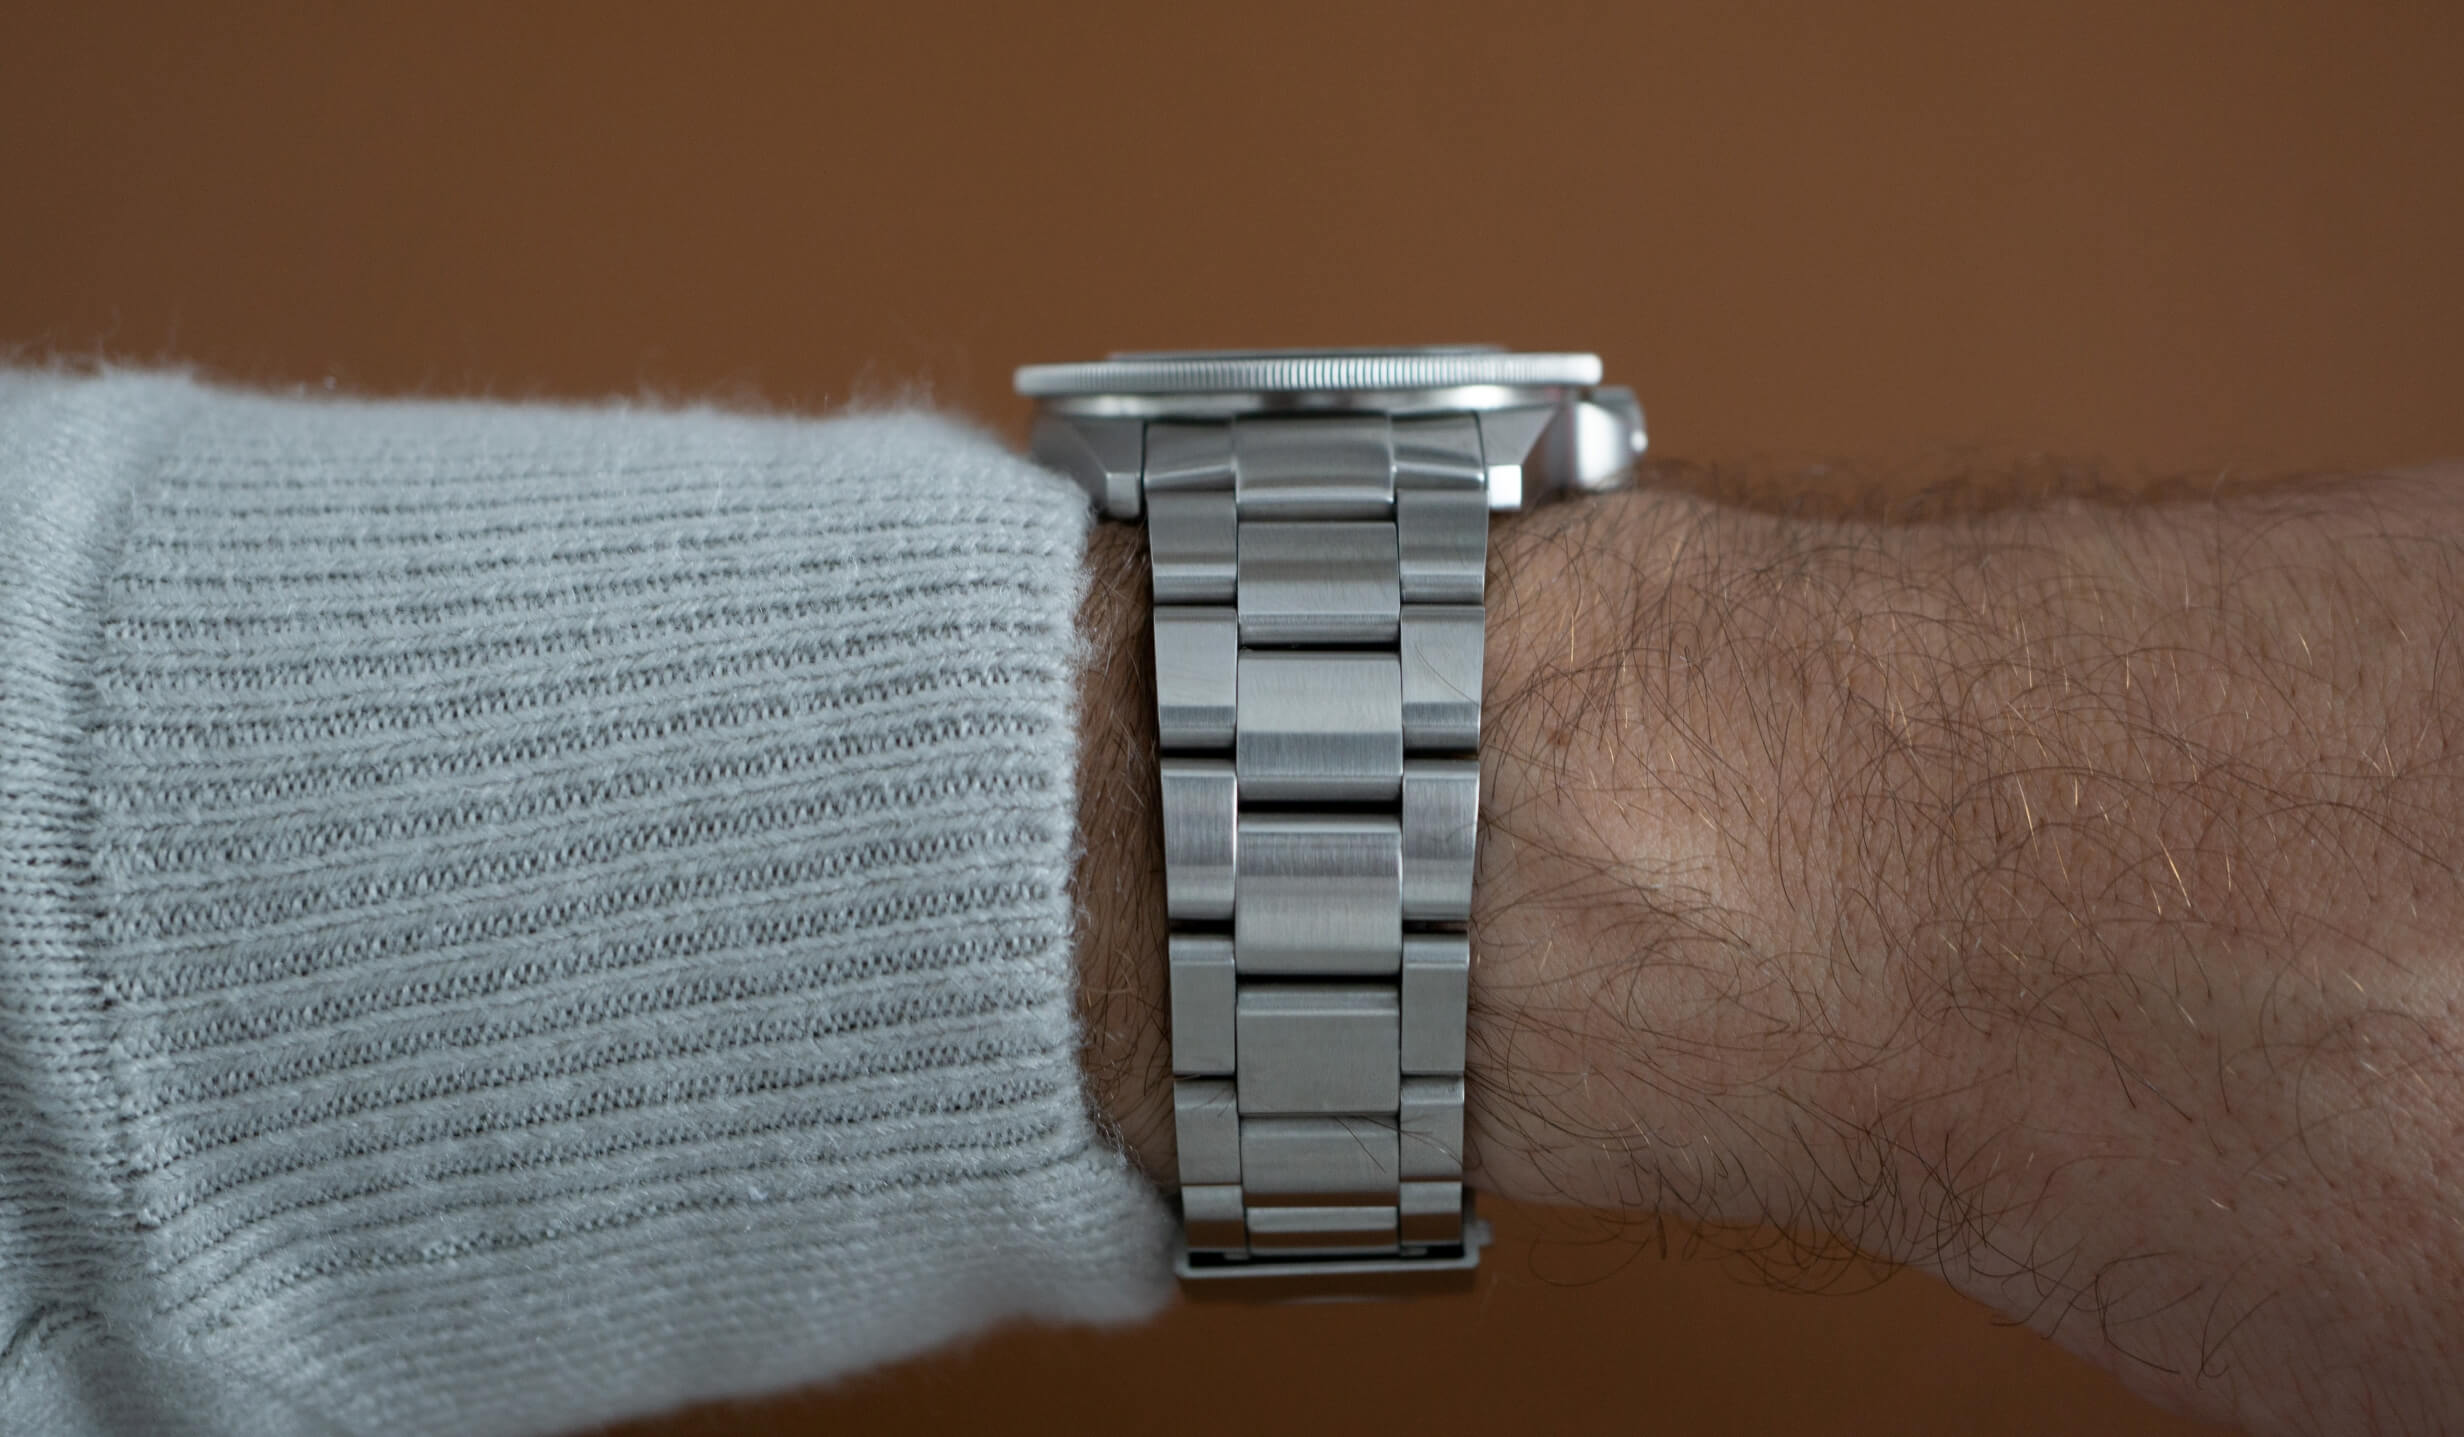 Side profile view of the Solid Steel Bracelet on the Unimatic UC